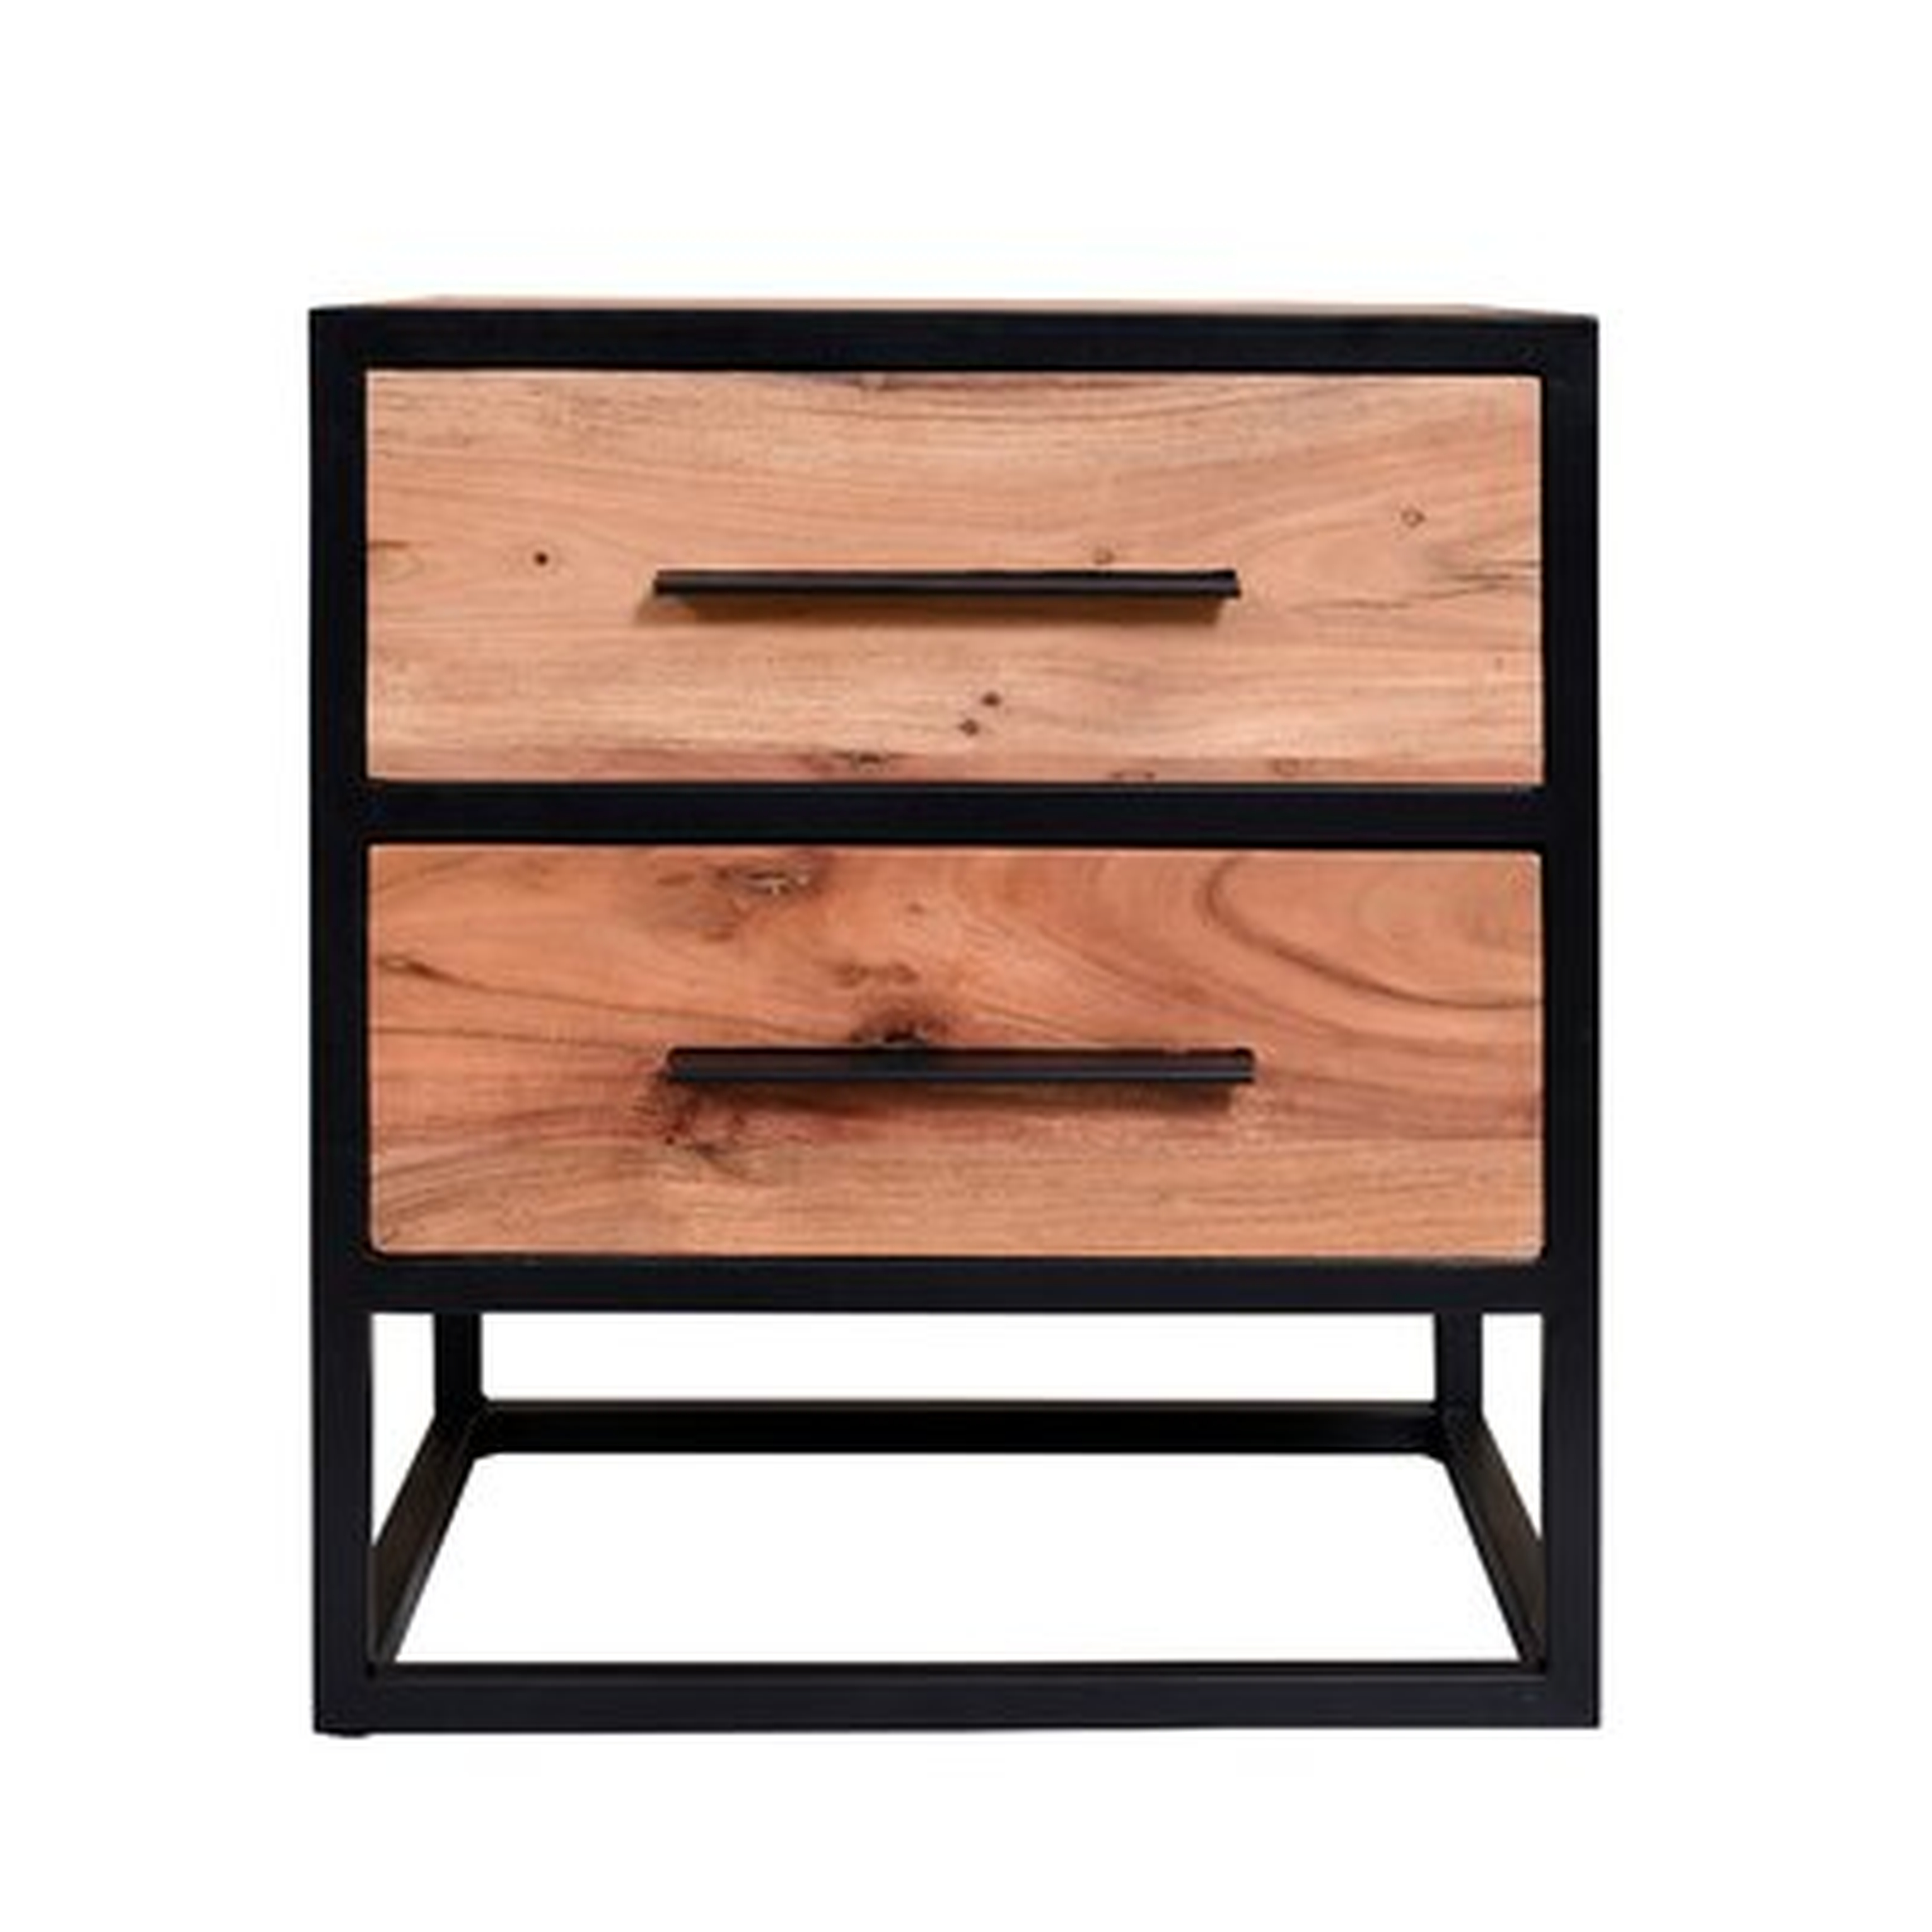 2 Drawer Industrial Wooden Accent Storage Nightstand With Metal Frame, Brown And Black - Wayfair